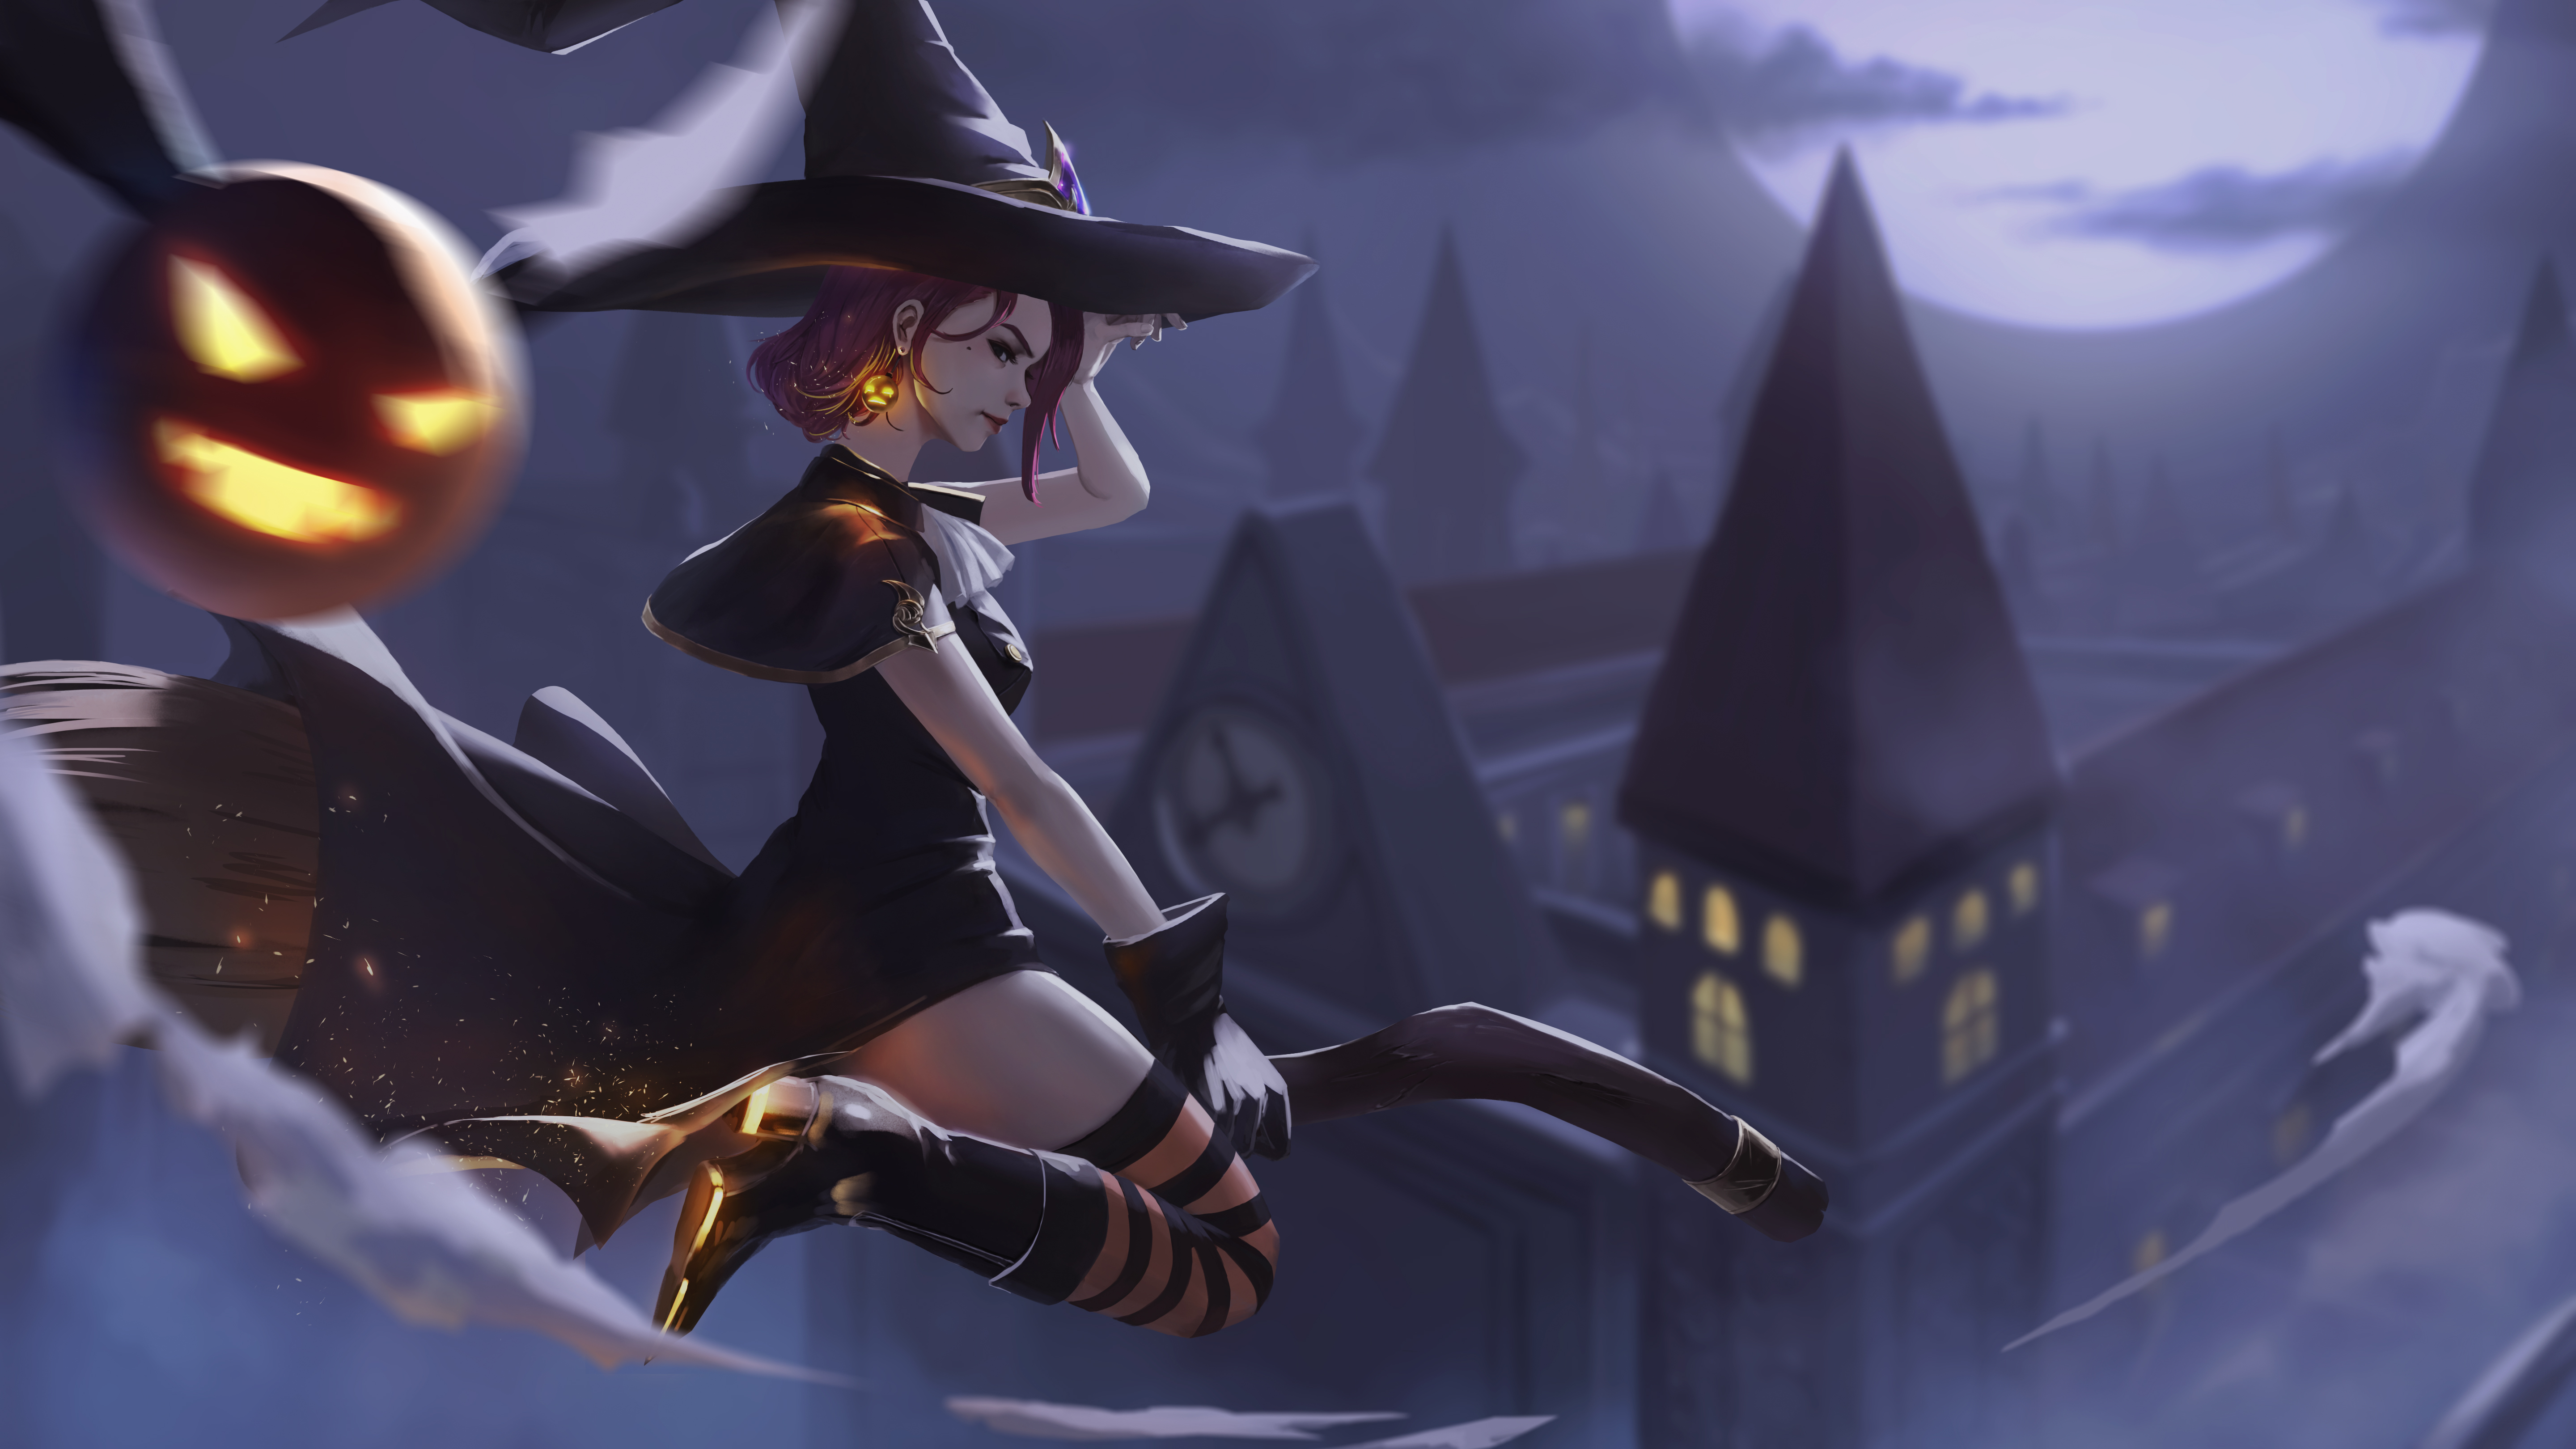 Women Fantasy Girl Witch Witch Hat Women With Hats Fantasy Art Profile Dress Black Dress Thigh Highs 5760x3240